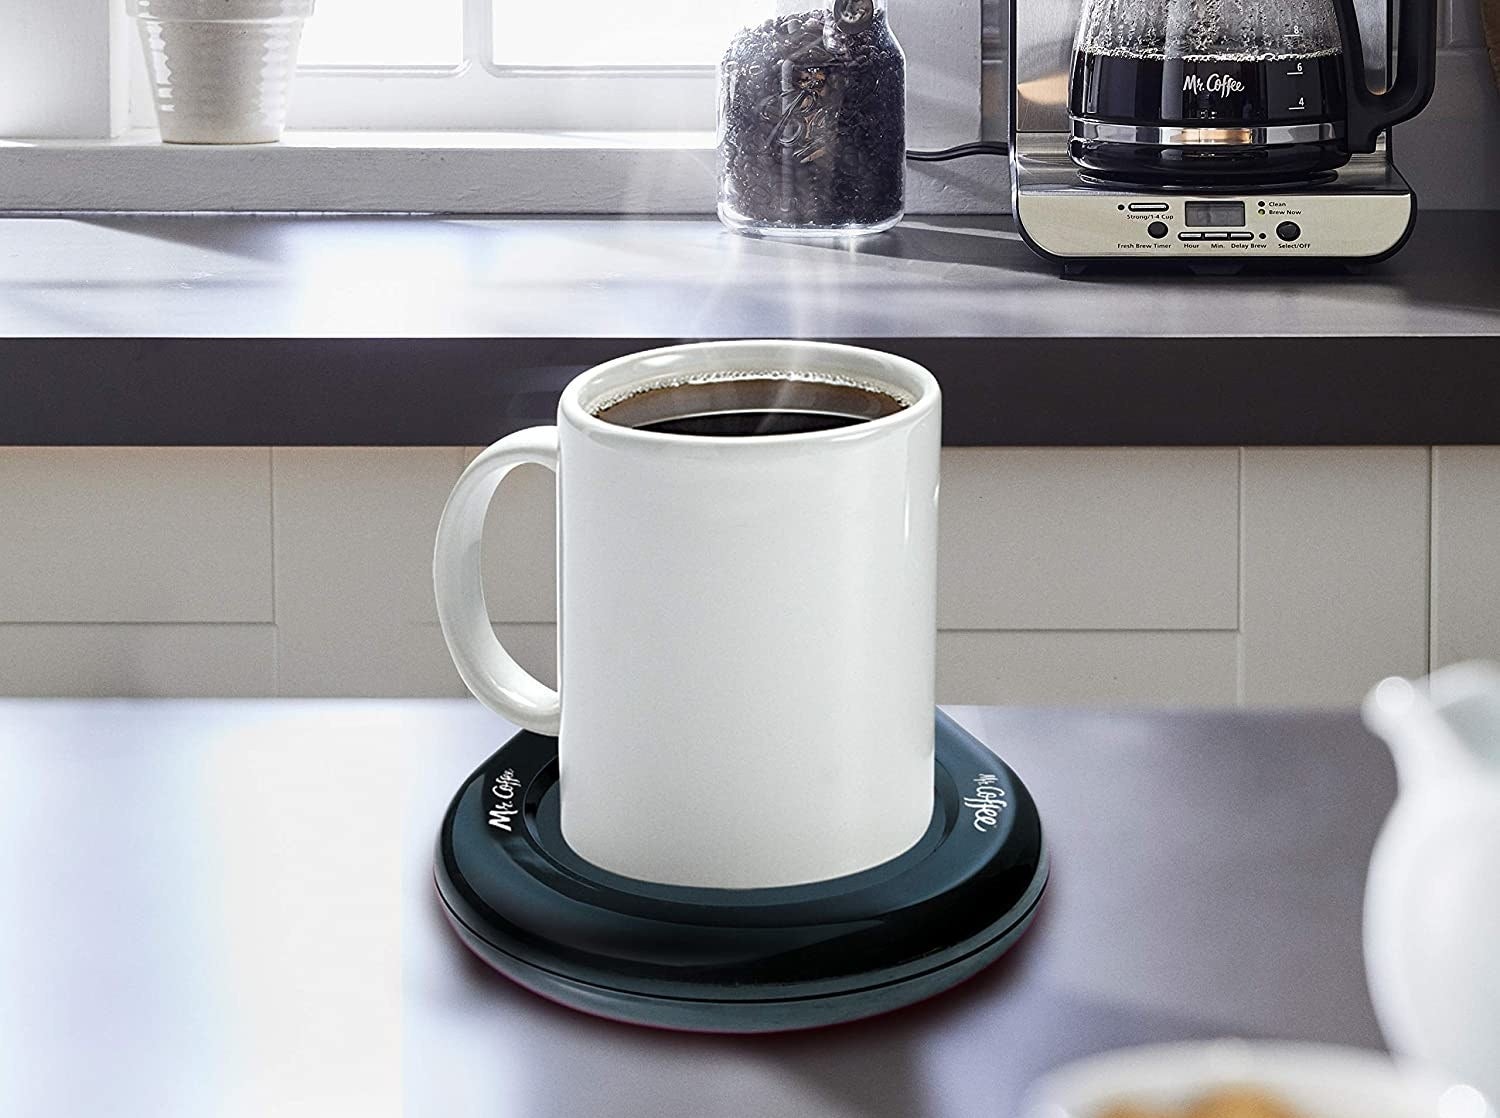 A mug filled with coffee placed on the warmer